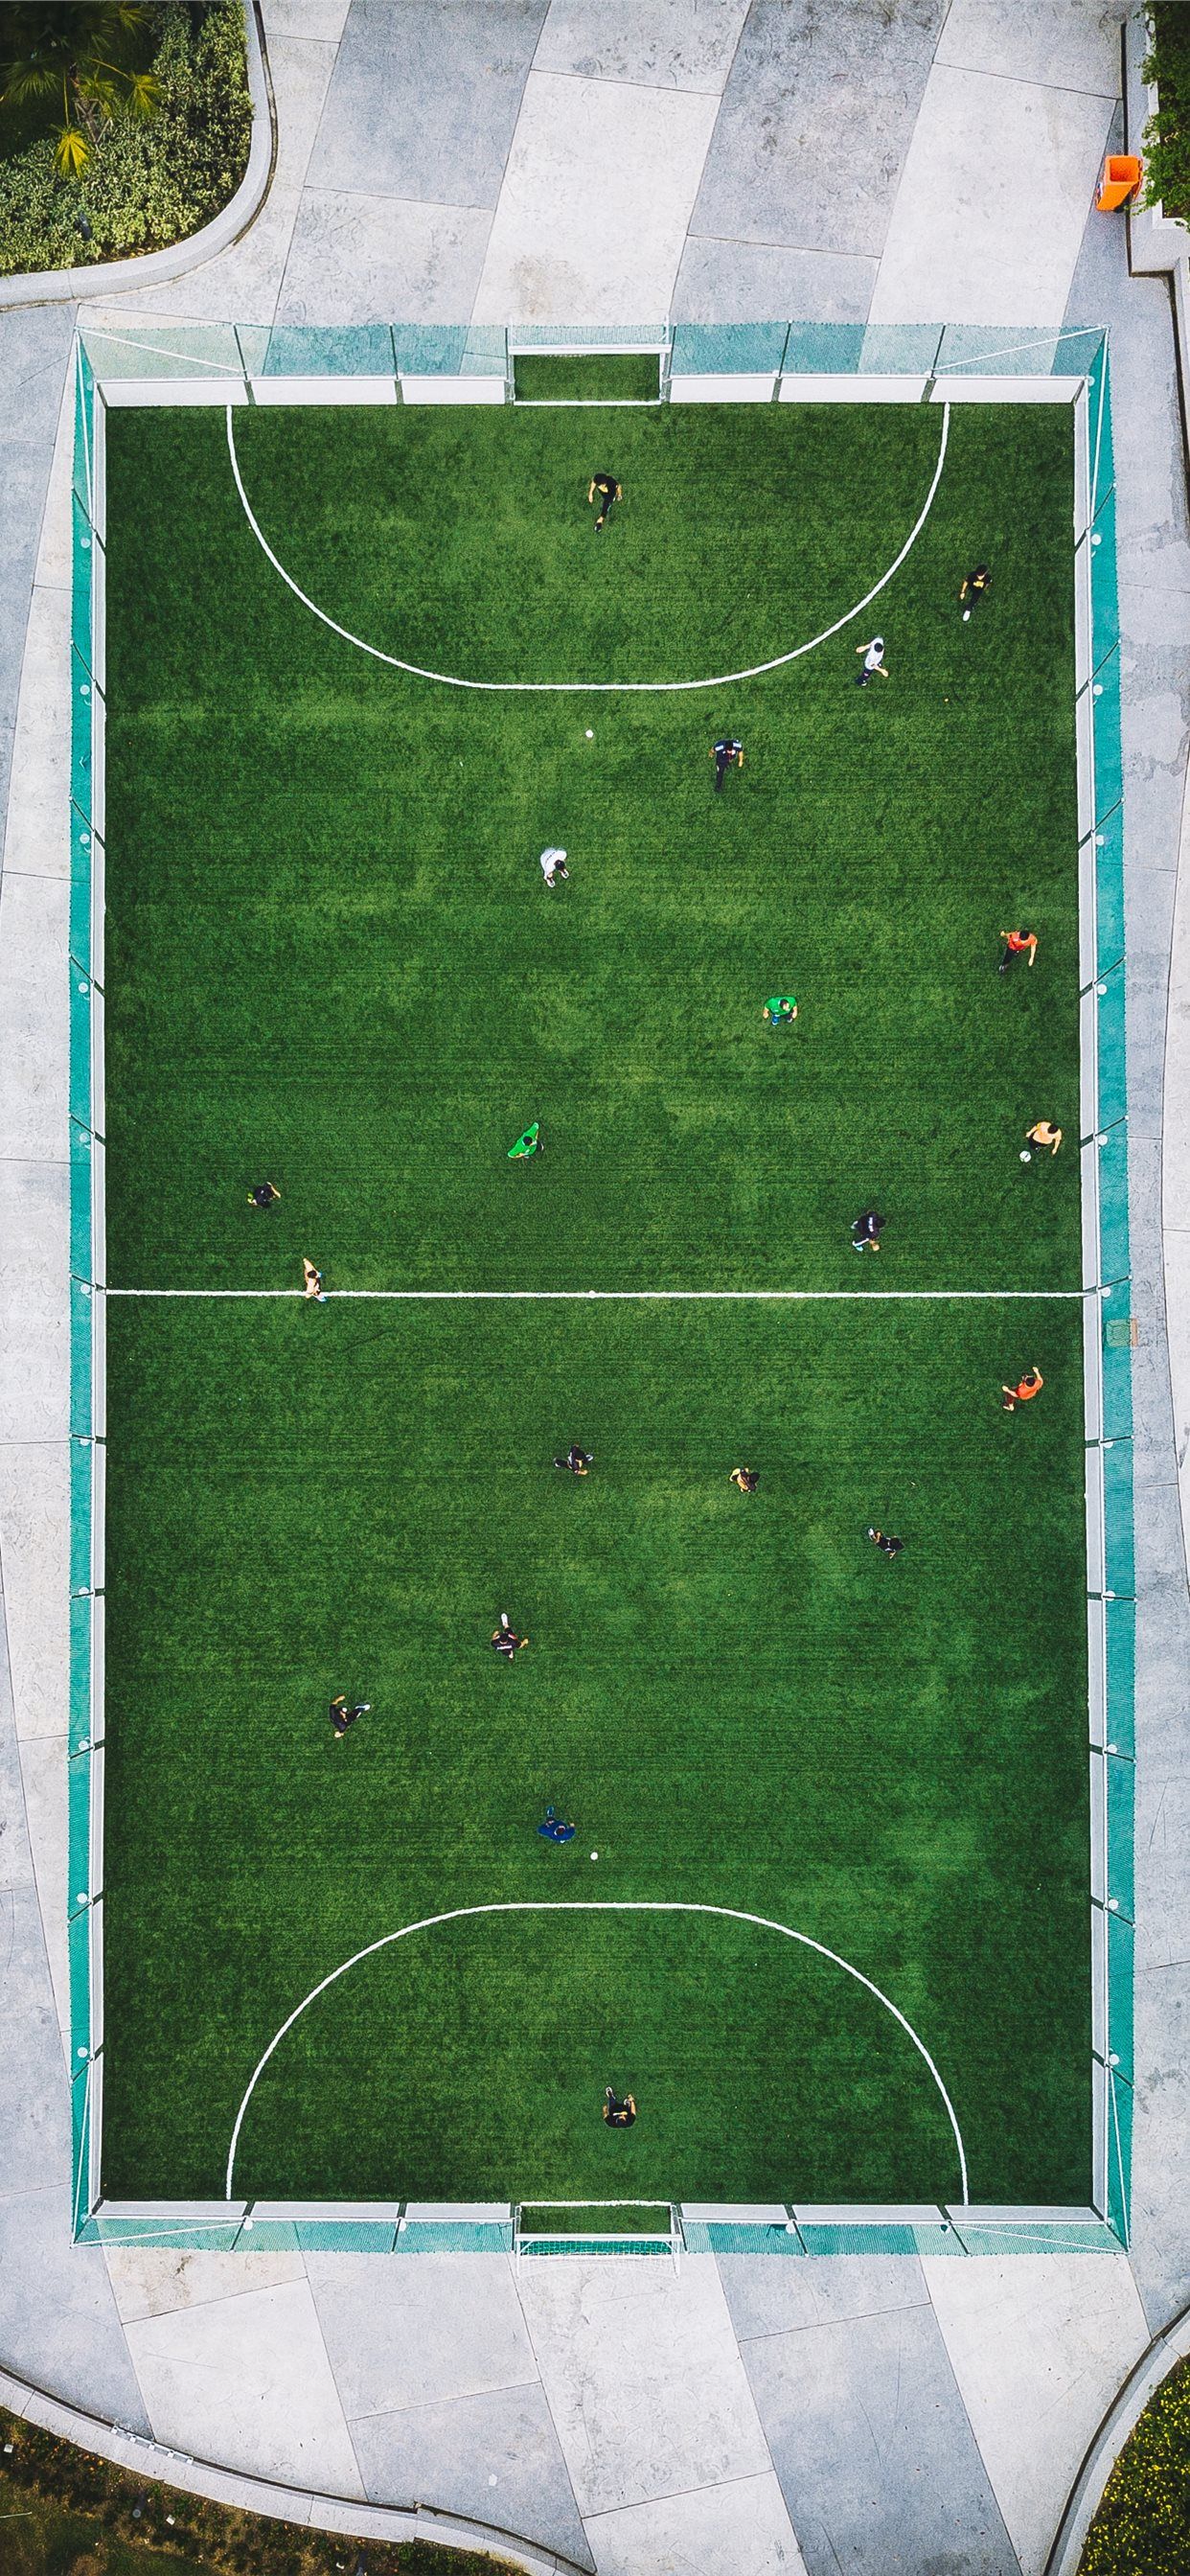 A view of people playing soccer on the grass - Soccer